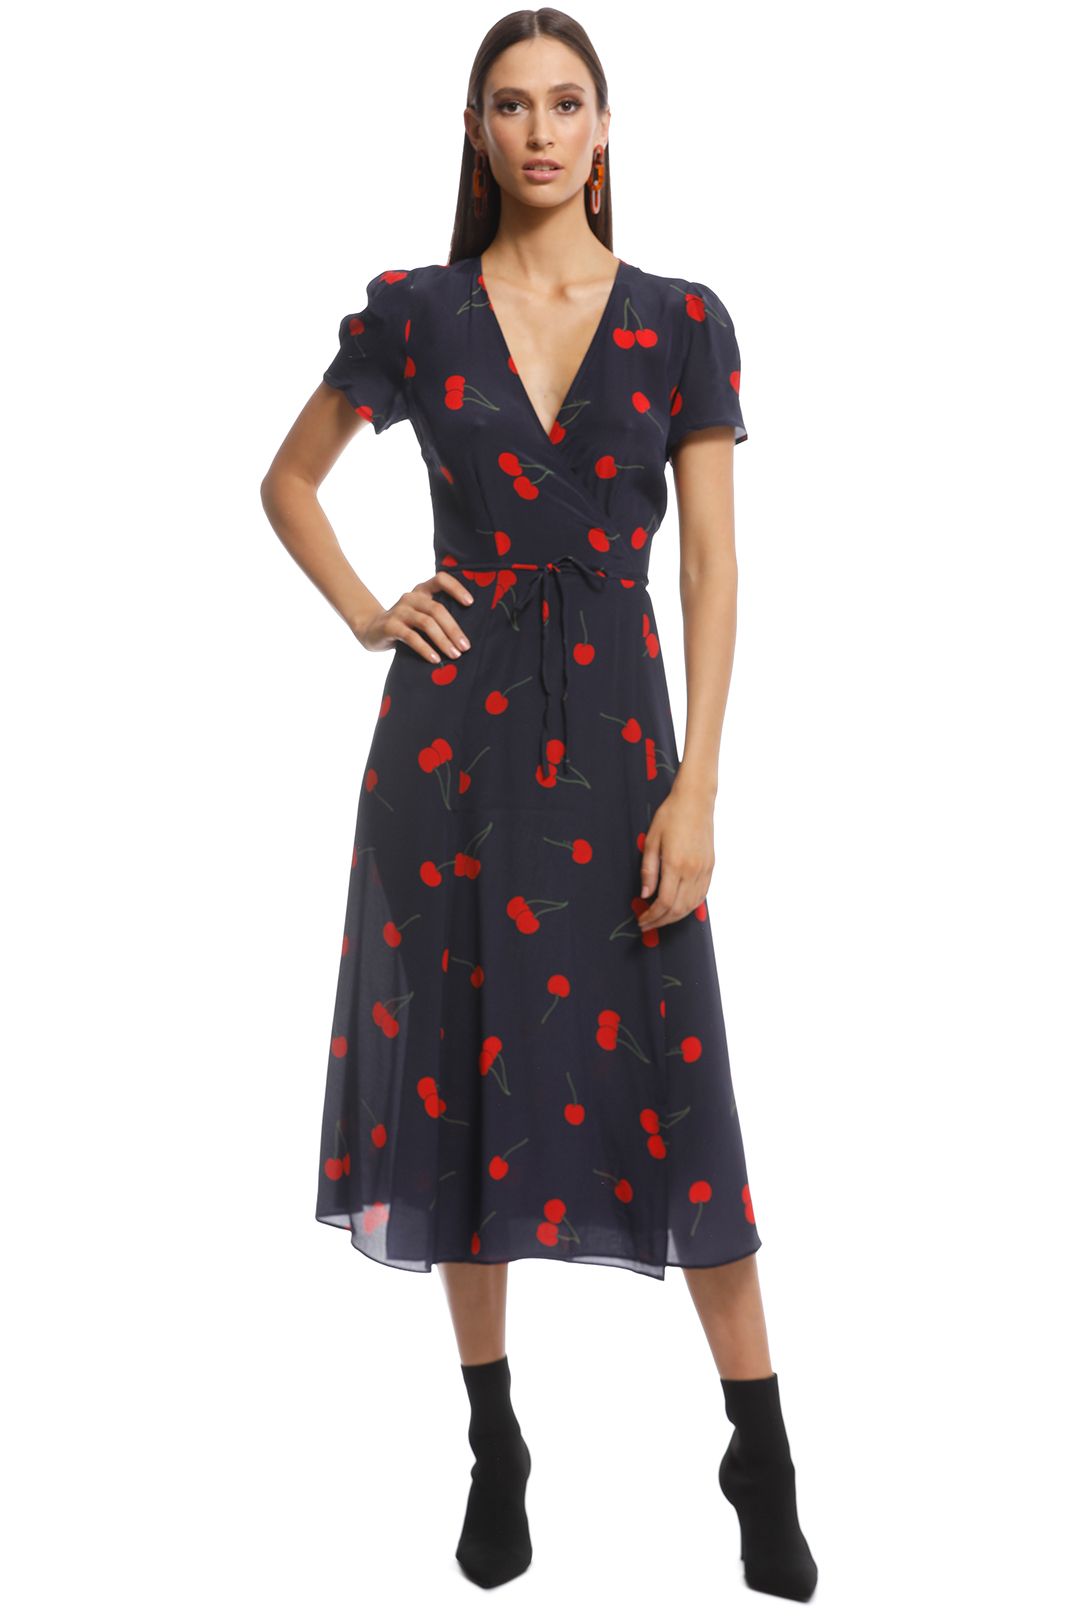 efficiently operation professional The Teale Midi Dress - Wild Cherry by Realisation Par for Hire